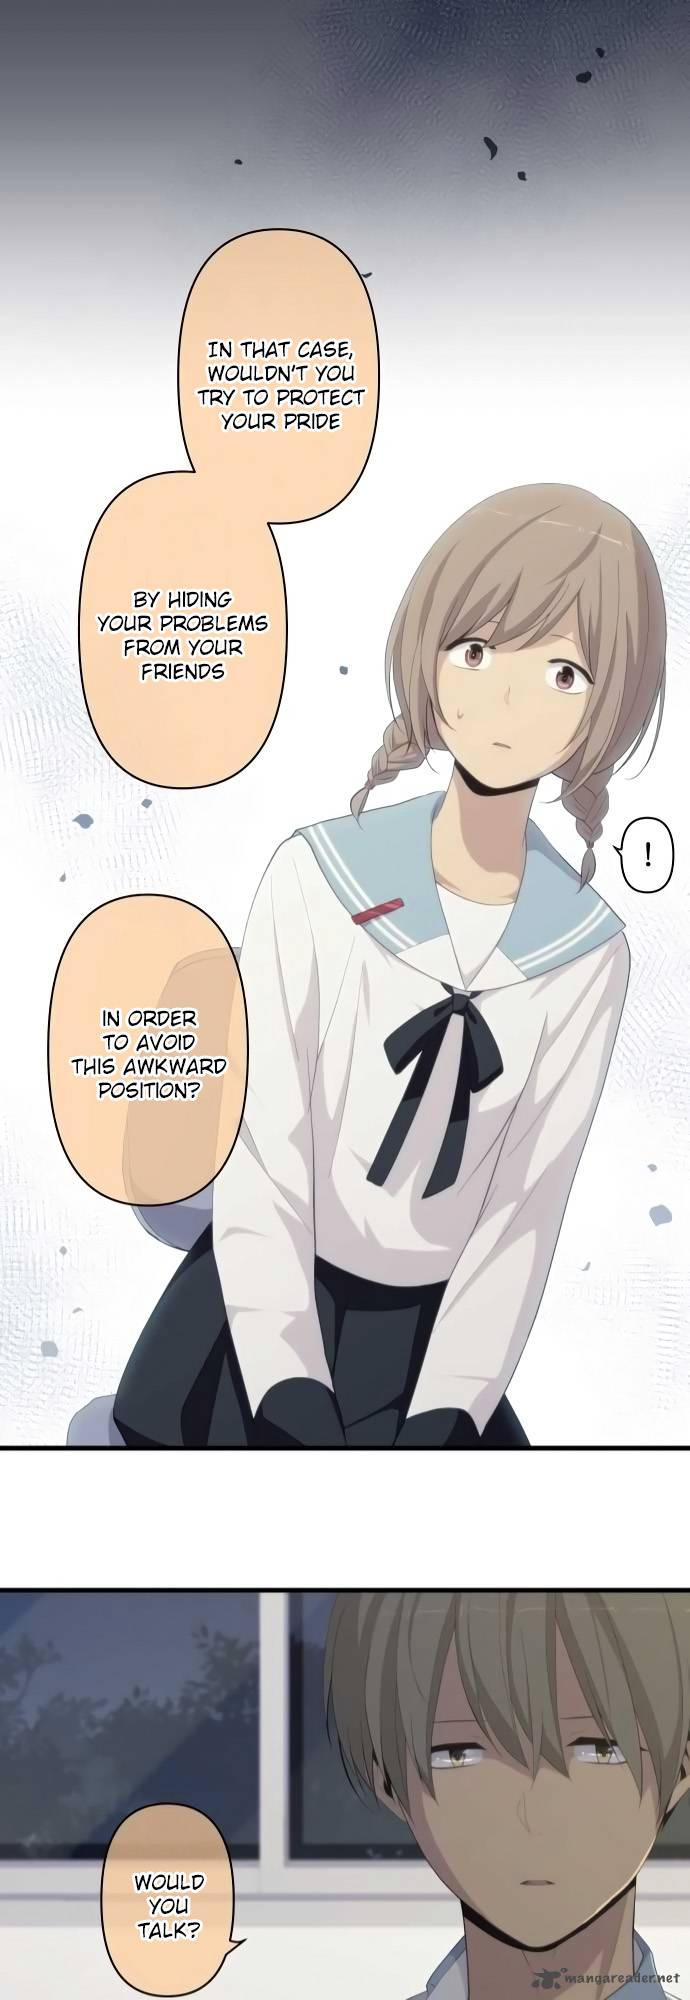 Relife 162 21